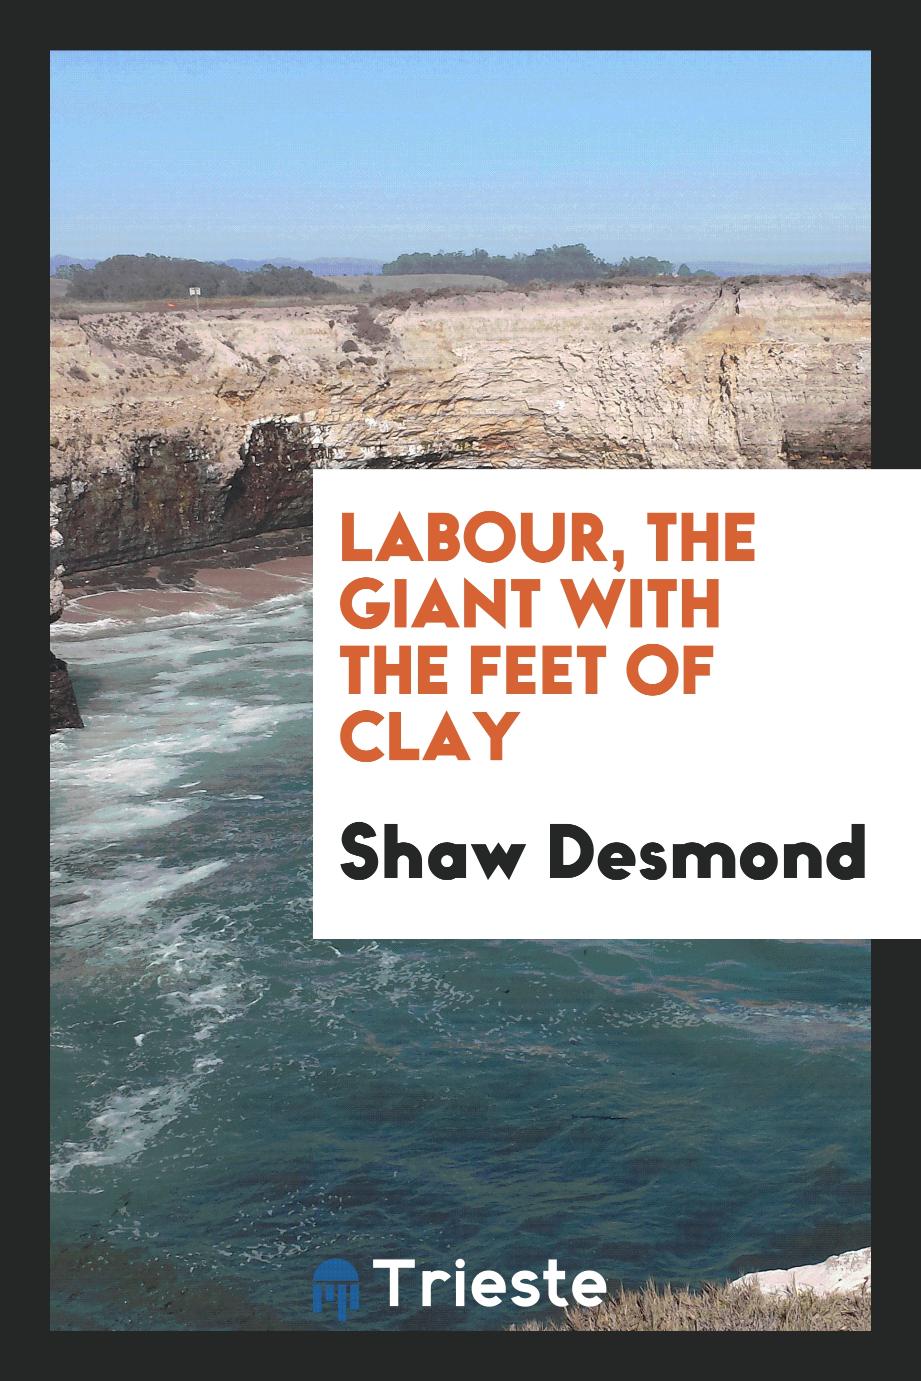 Labour, the giant with the feet of clay